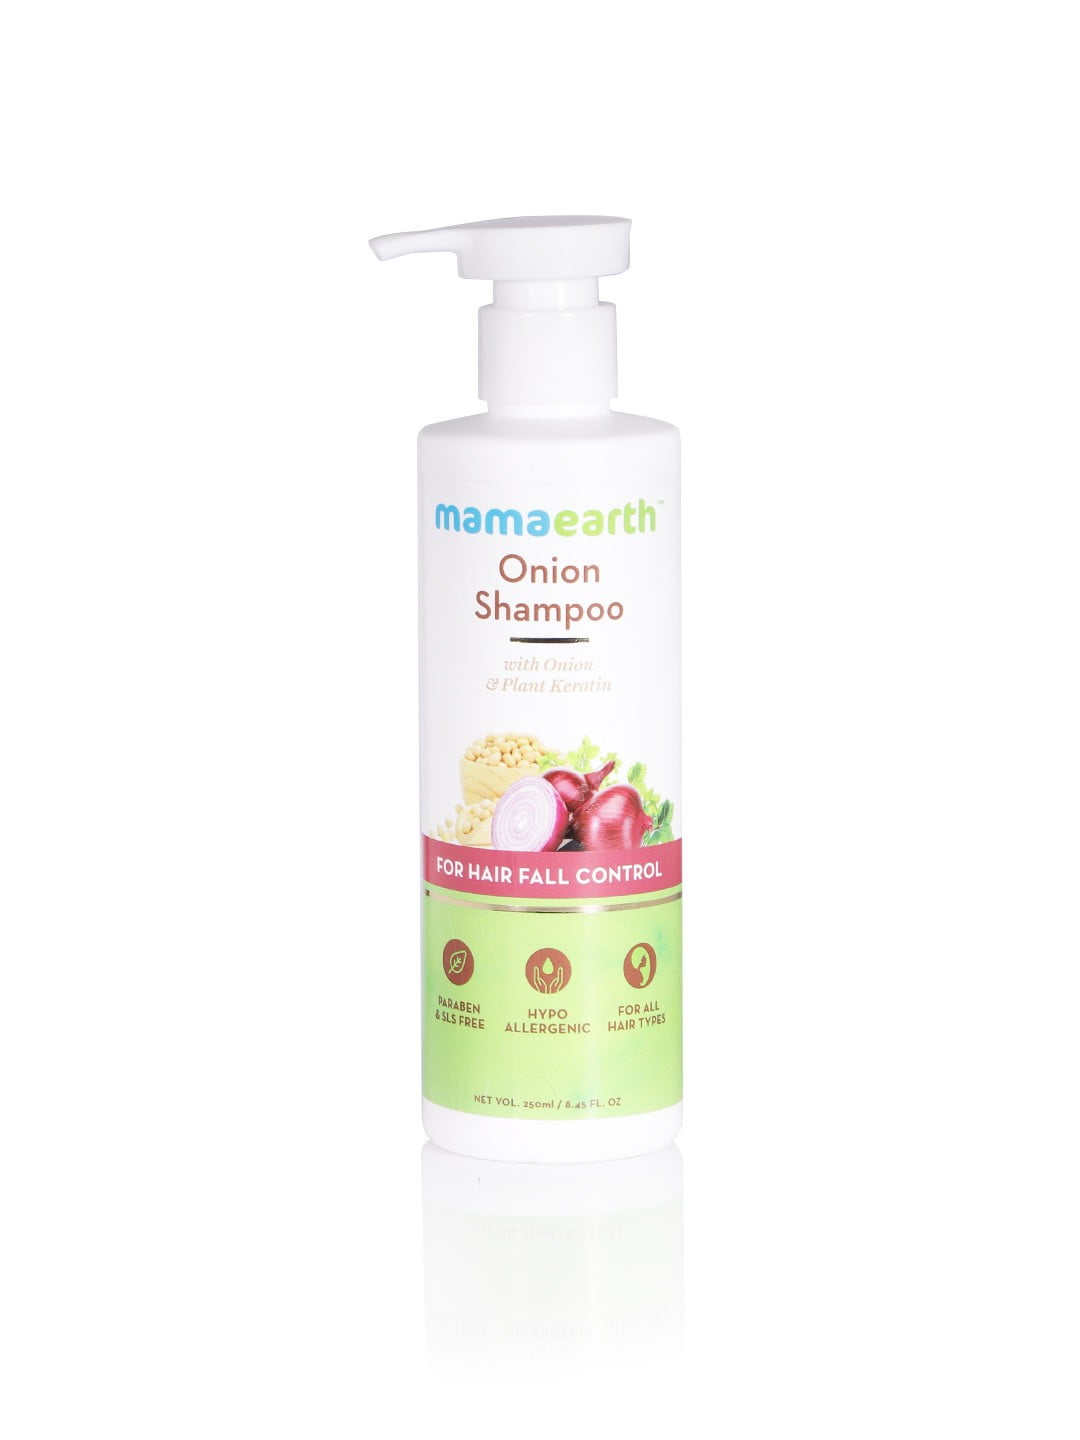 MamaEarth Onion Shampoo with Onion & Plant Keratin for Hair Fall Control 250ml (Country of Origin: India)